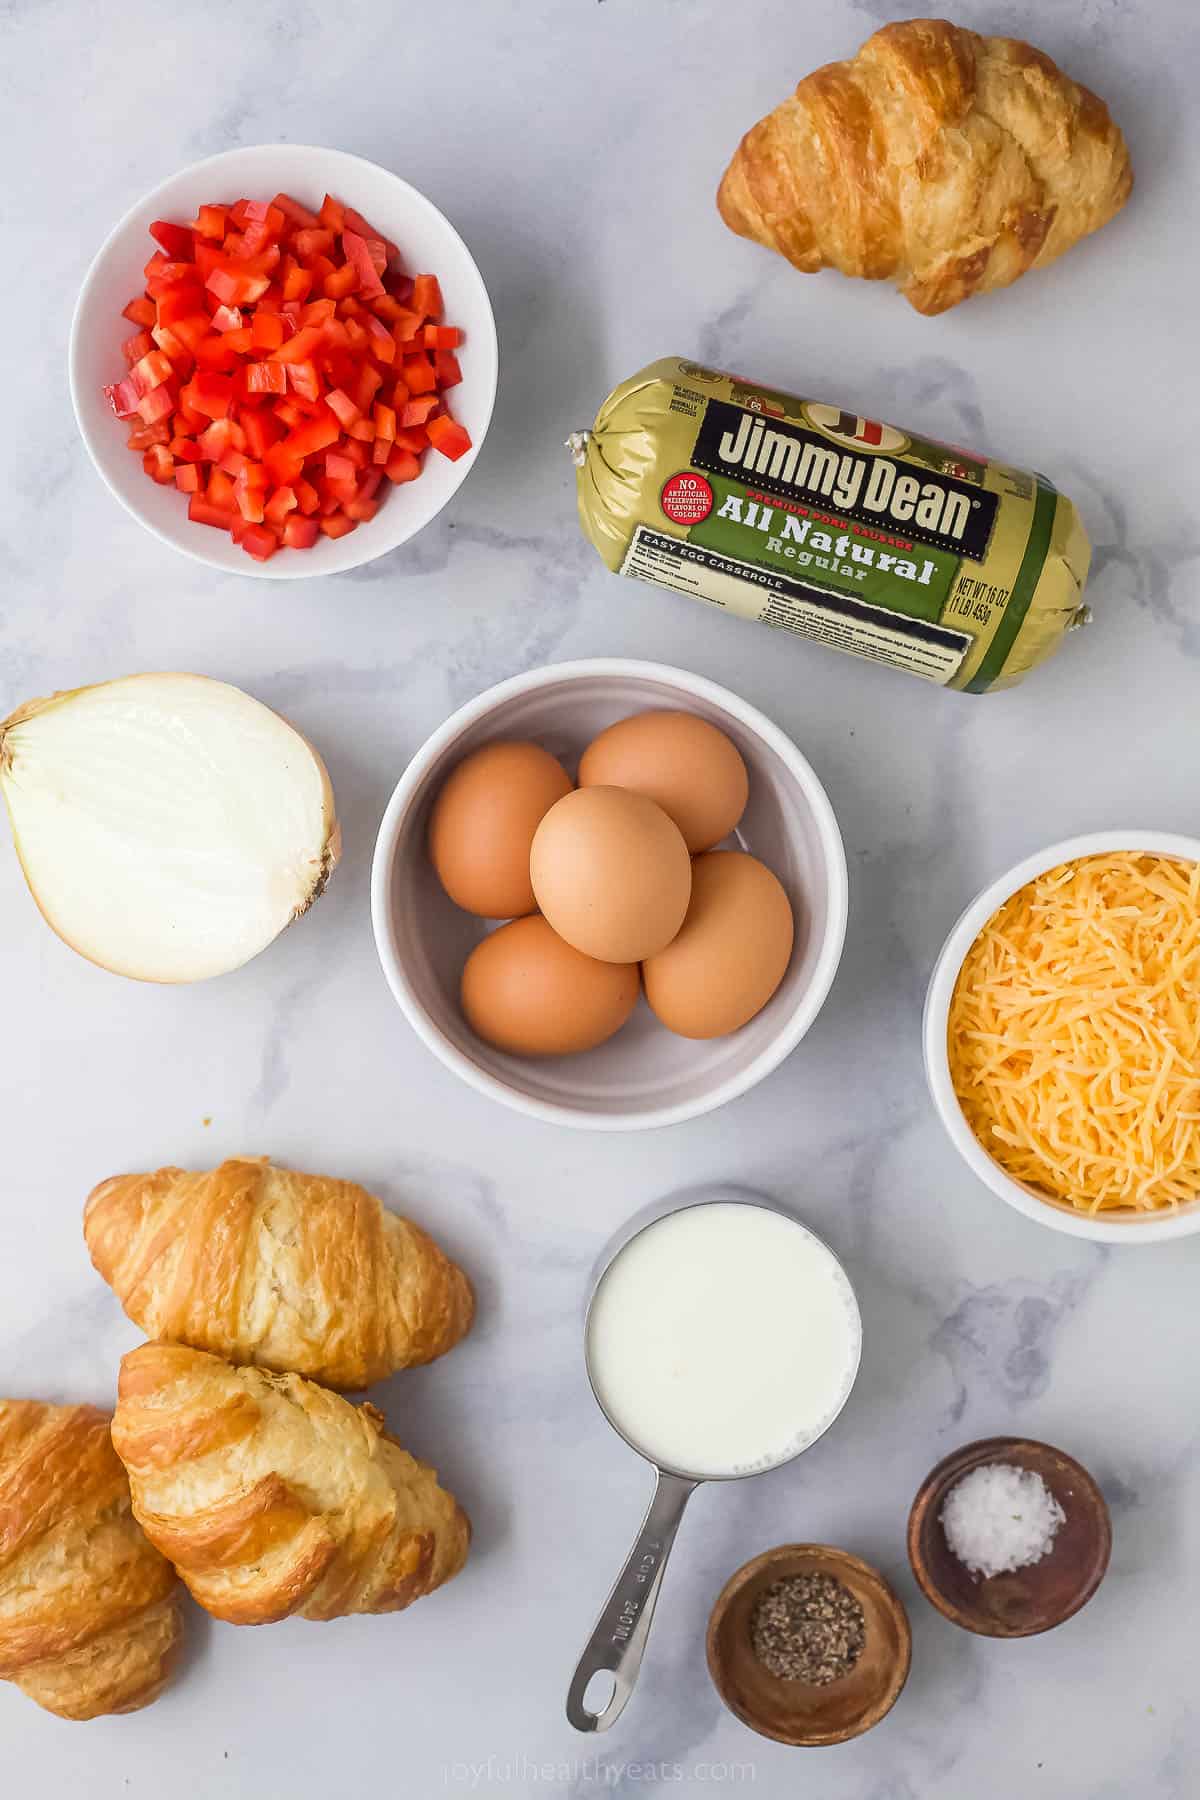 ingredients to make a breakfast casserole like eggs, sausage, cheese, red peppers, croisssants, and cream